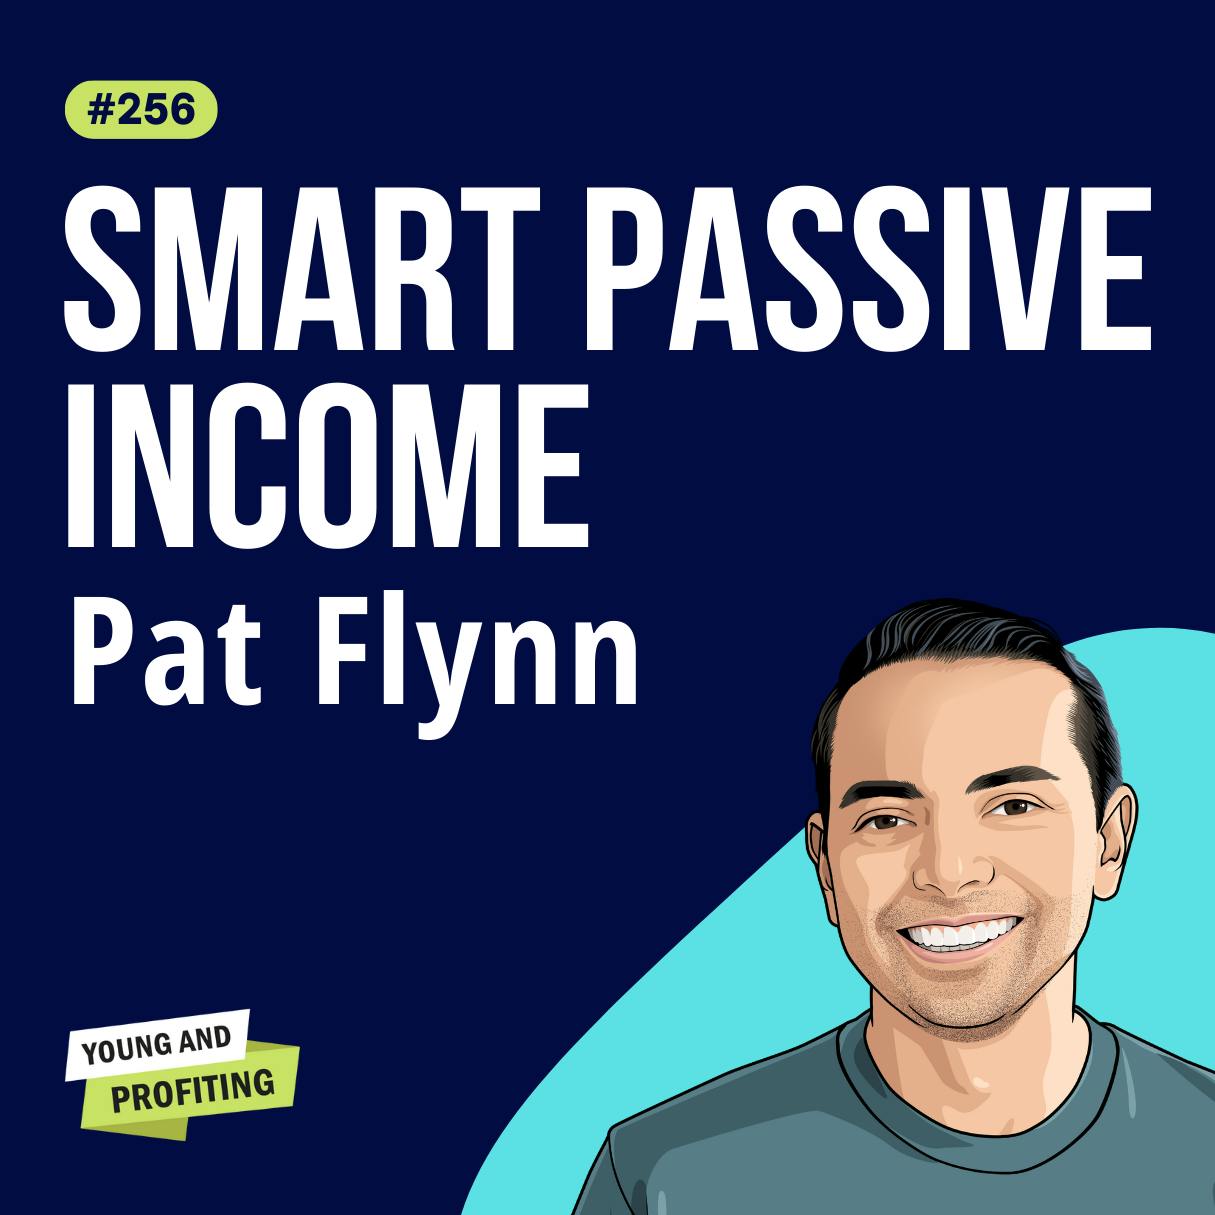 Pat Flynn: Online Business 101, How to Generate 6 Figures of Passive Income and Create a Cult of Superfans | E256 by Hala Taha | YAP Media Network